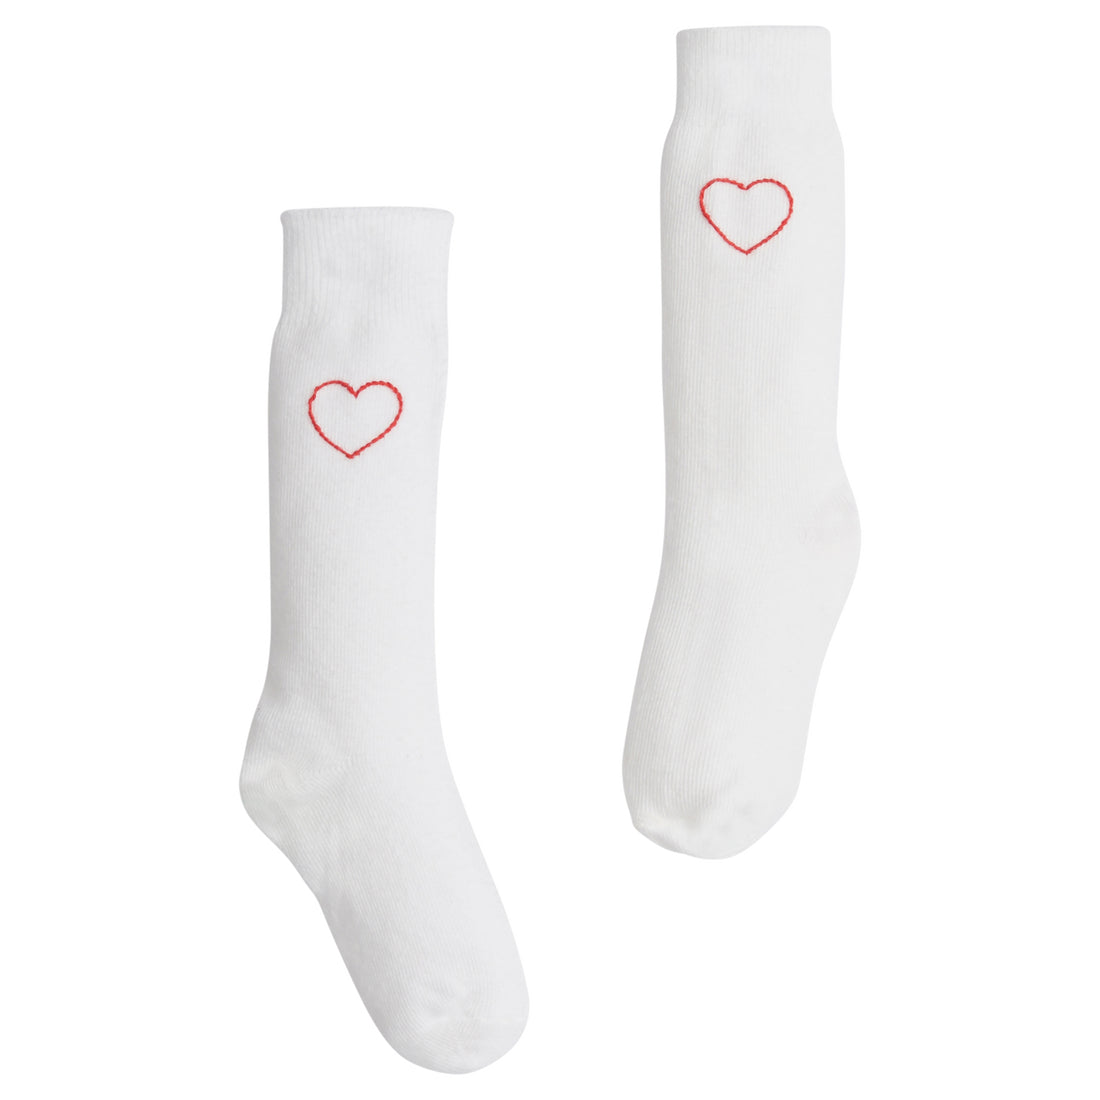 Little English classic embroidered knee high socks for Spring with red hearts for Valentine&